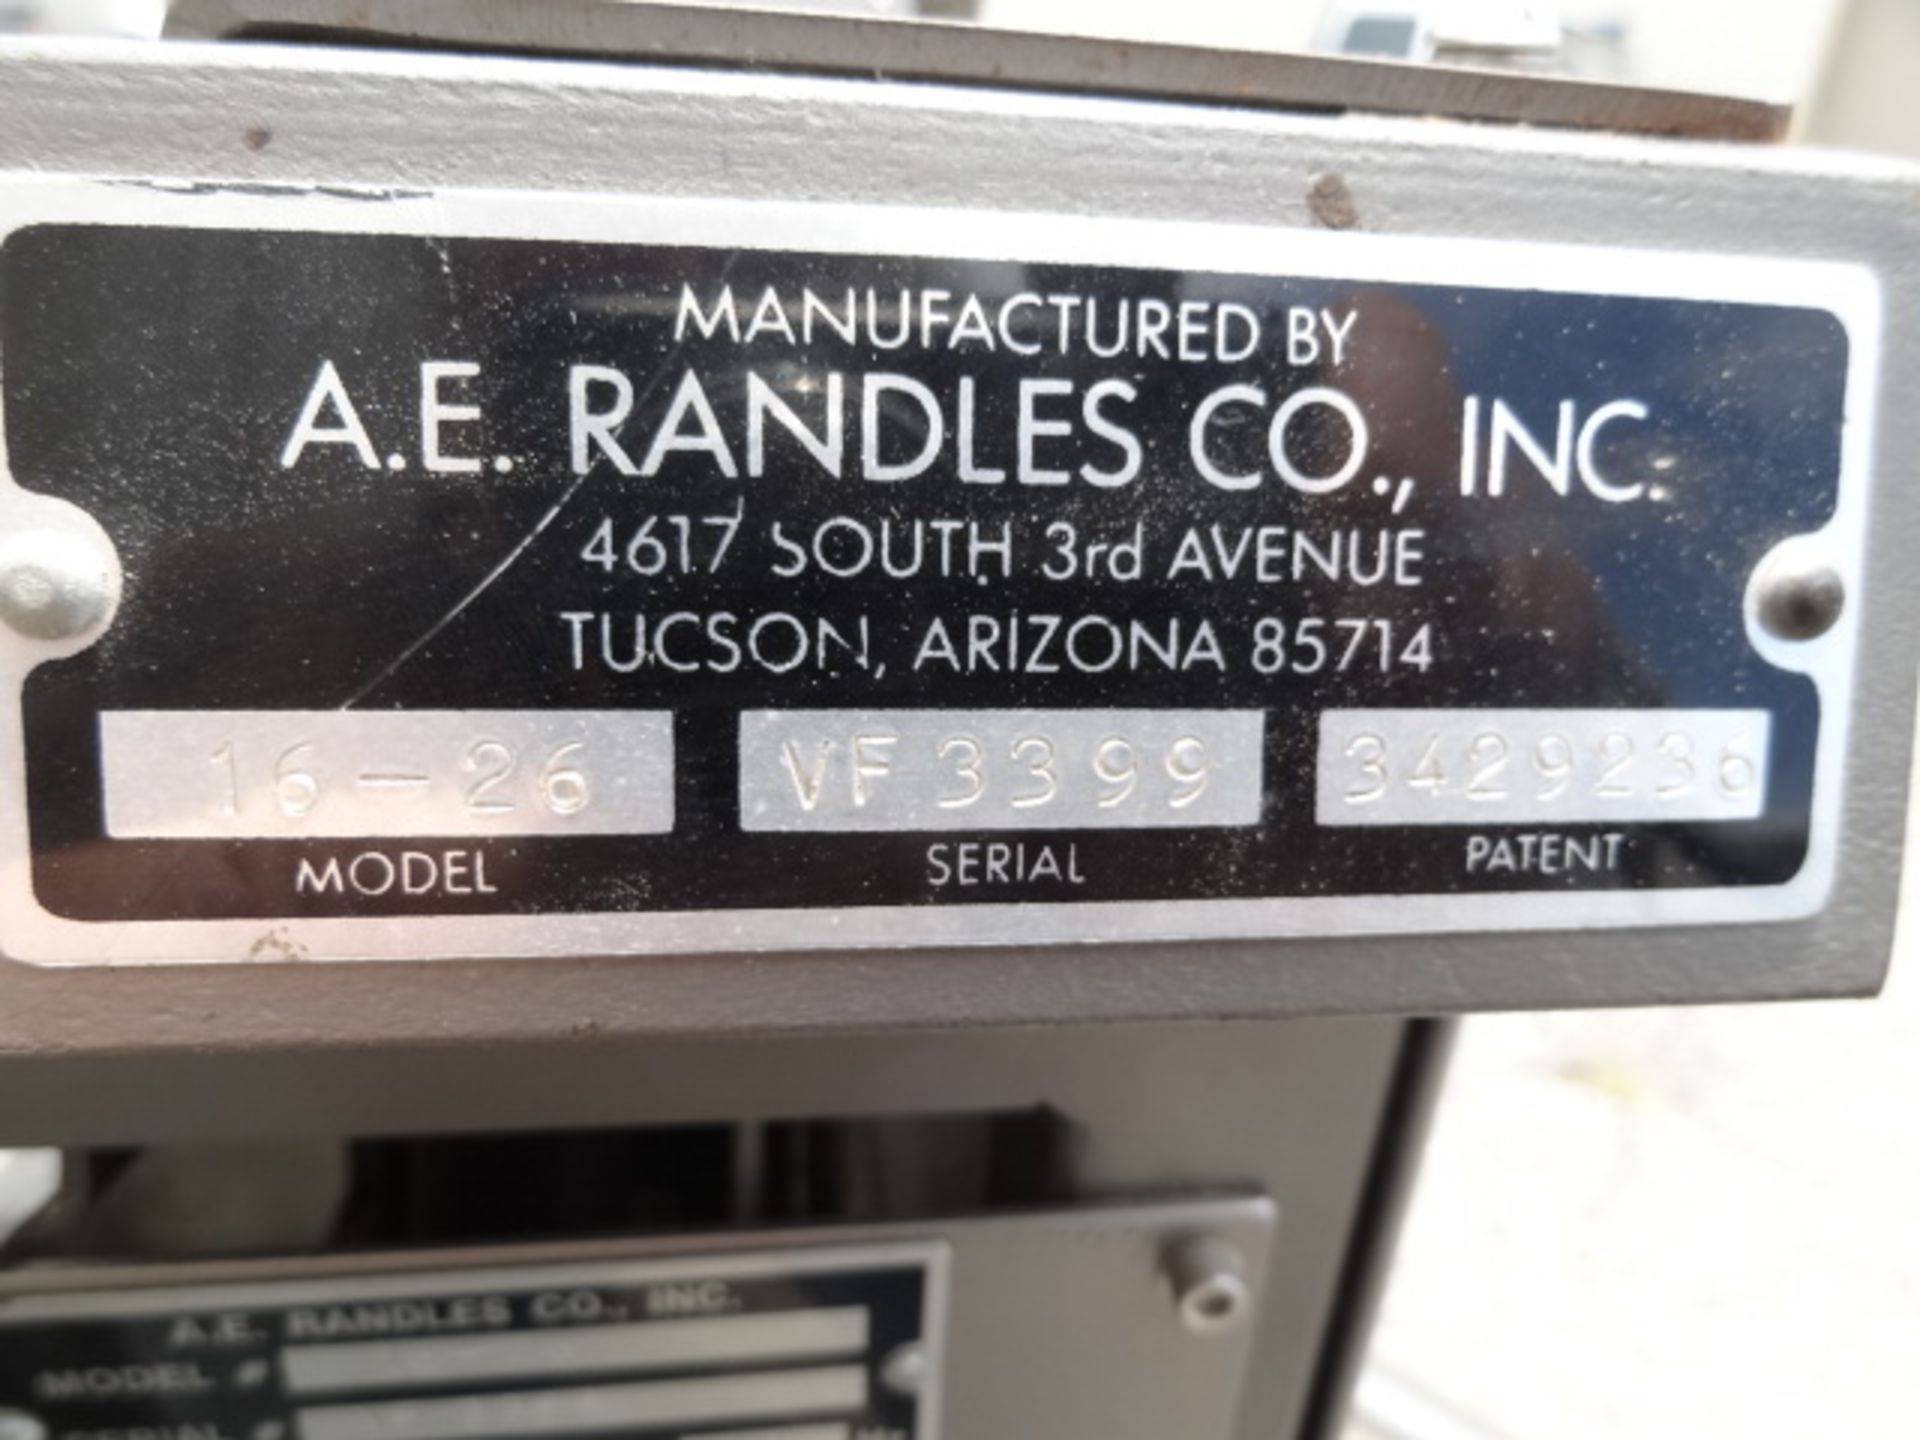 AE Randles Tray Former, Model # 16-26, S/N VF-3399, single forming head for self-locking style - Image 5 of 5